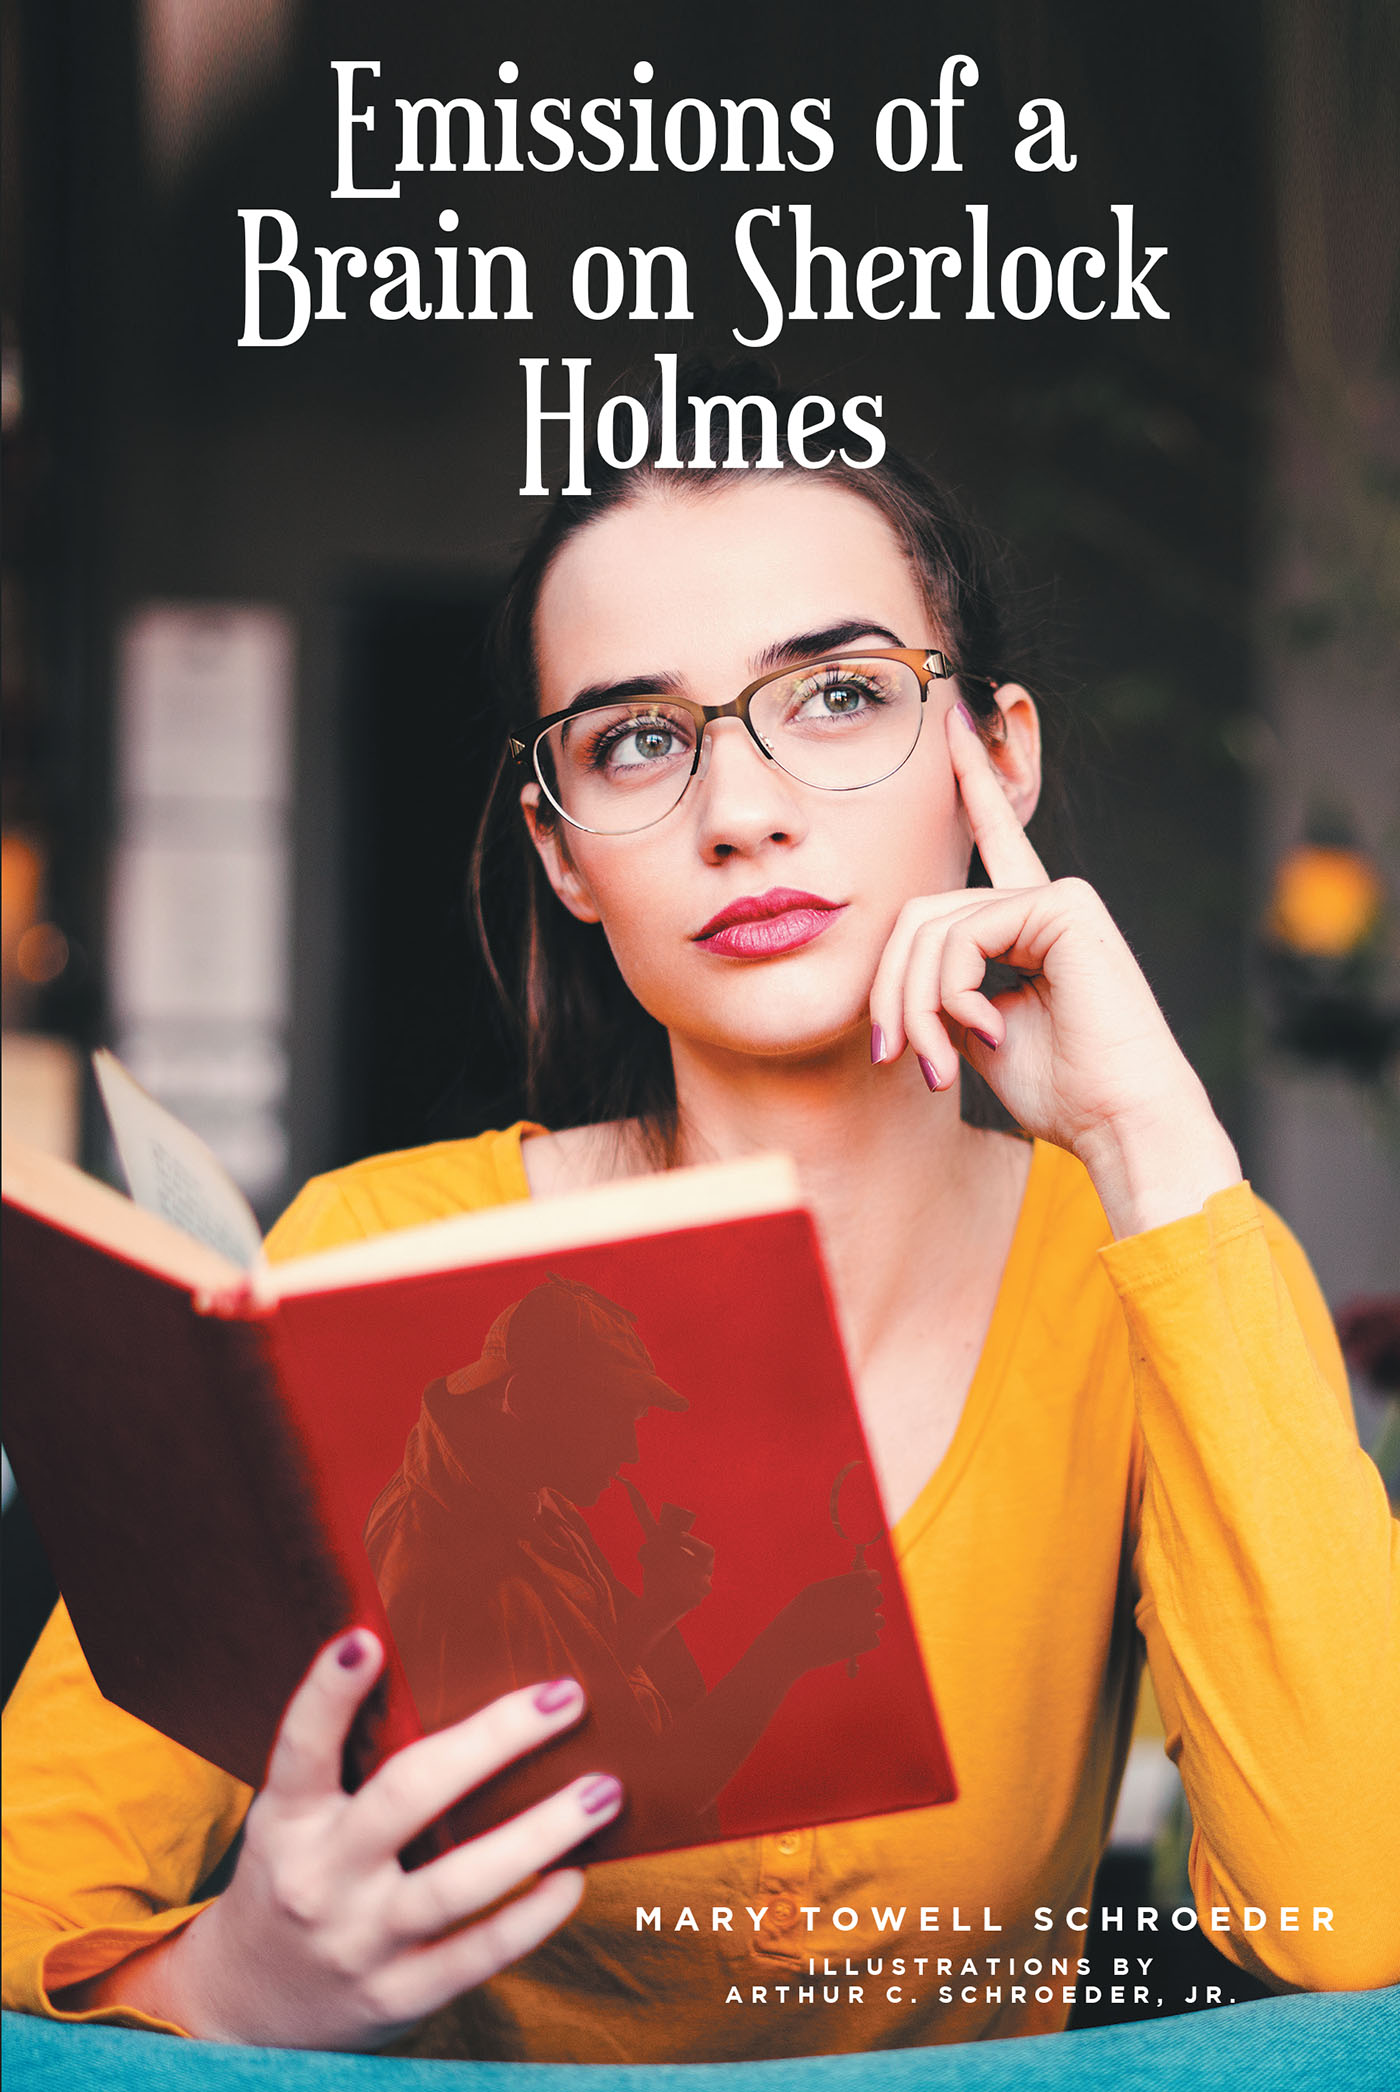 Mary Towell Schroeder’s New Book, "Emissions from a Brain on Sherlock Holmes," is an Erudite Excursion Through the Literary Detective’s Most Famous Cases